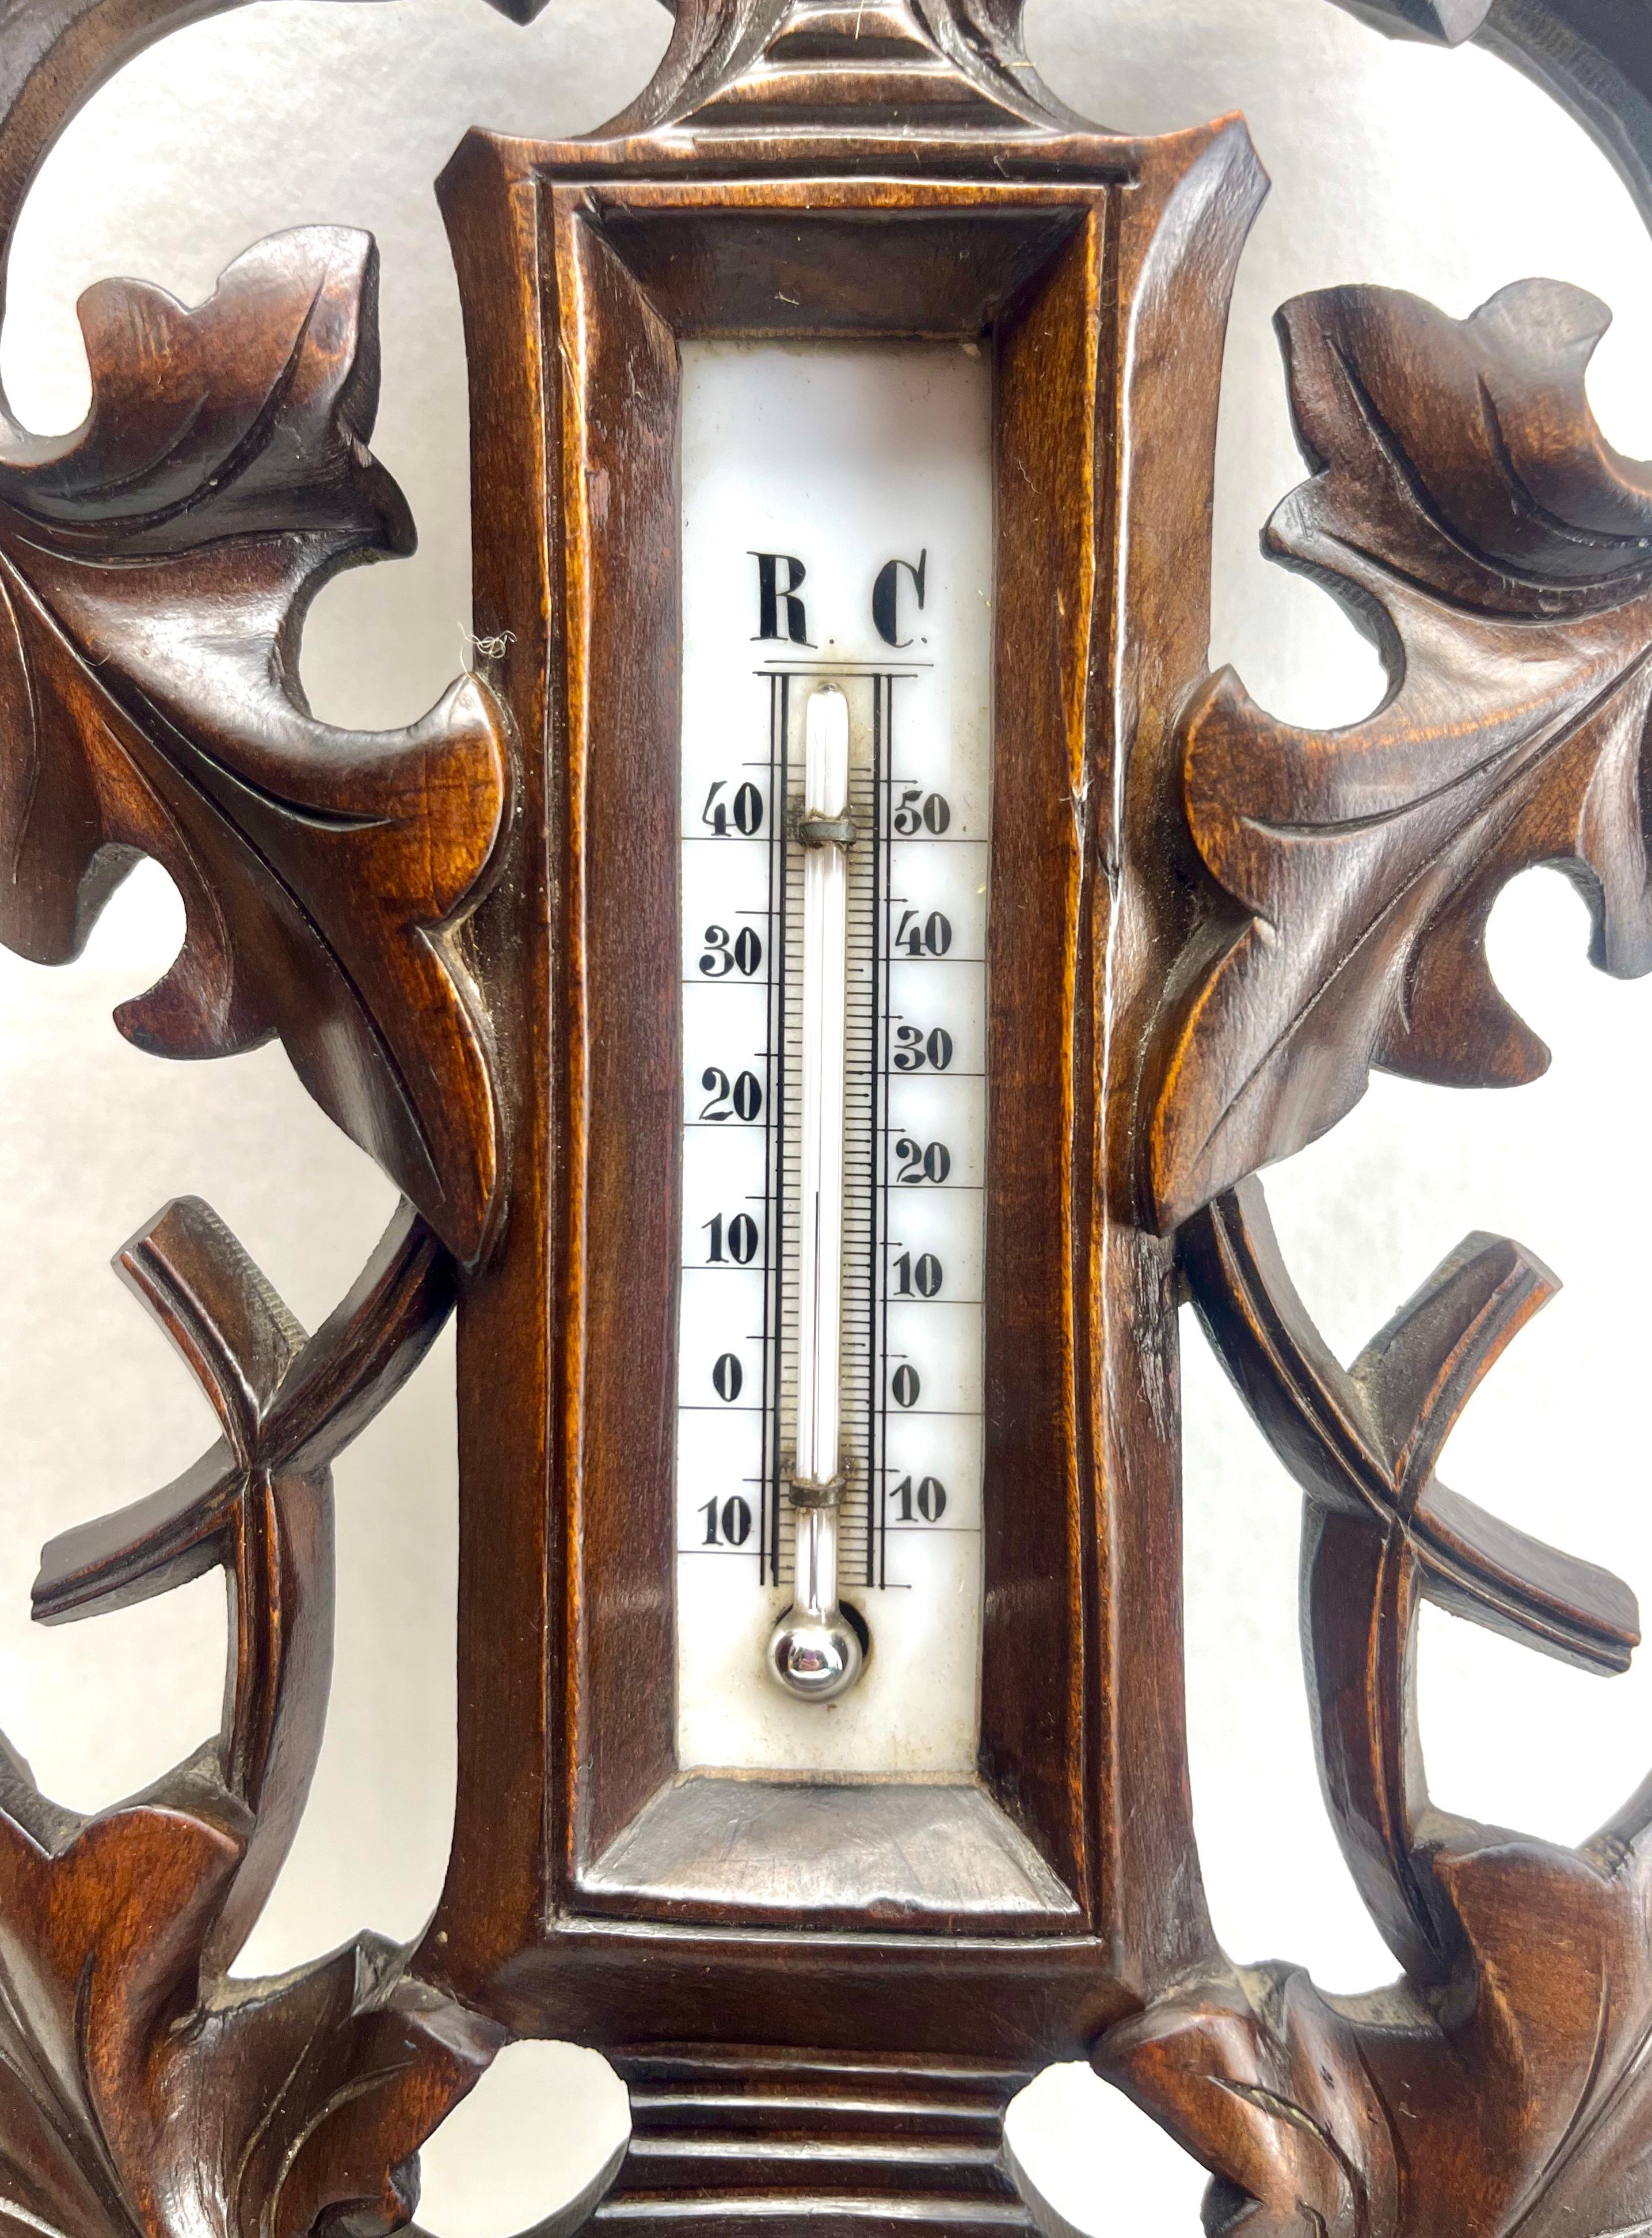 Carved wooden G Tart Liege antique Belgium Barometer with Thermometer, 1910s

Unusual antique carved wooden barometer in a lovely carved case, working order.

With best Wishes, Geert
 




































.